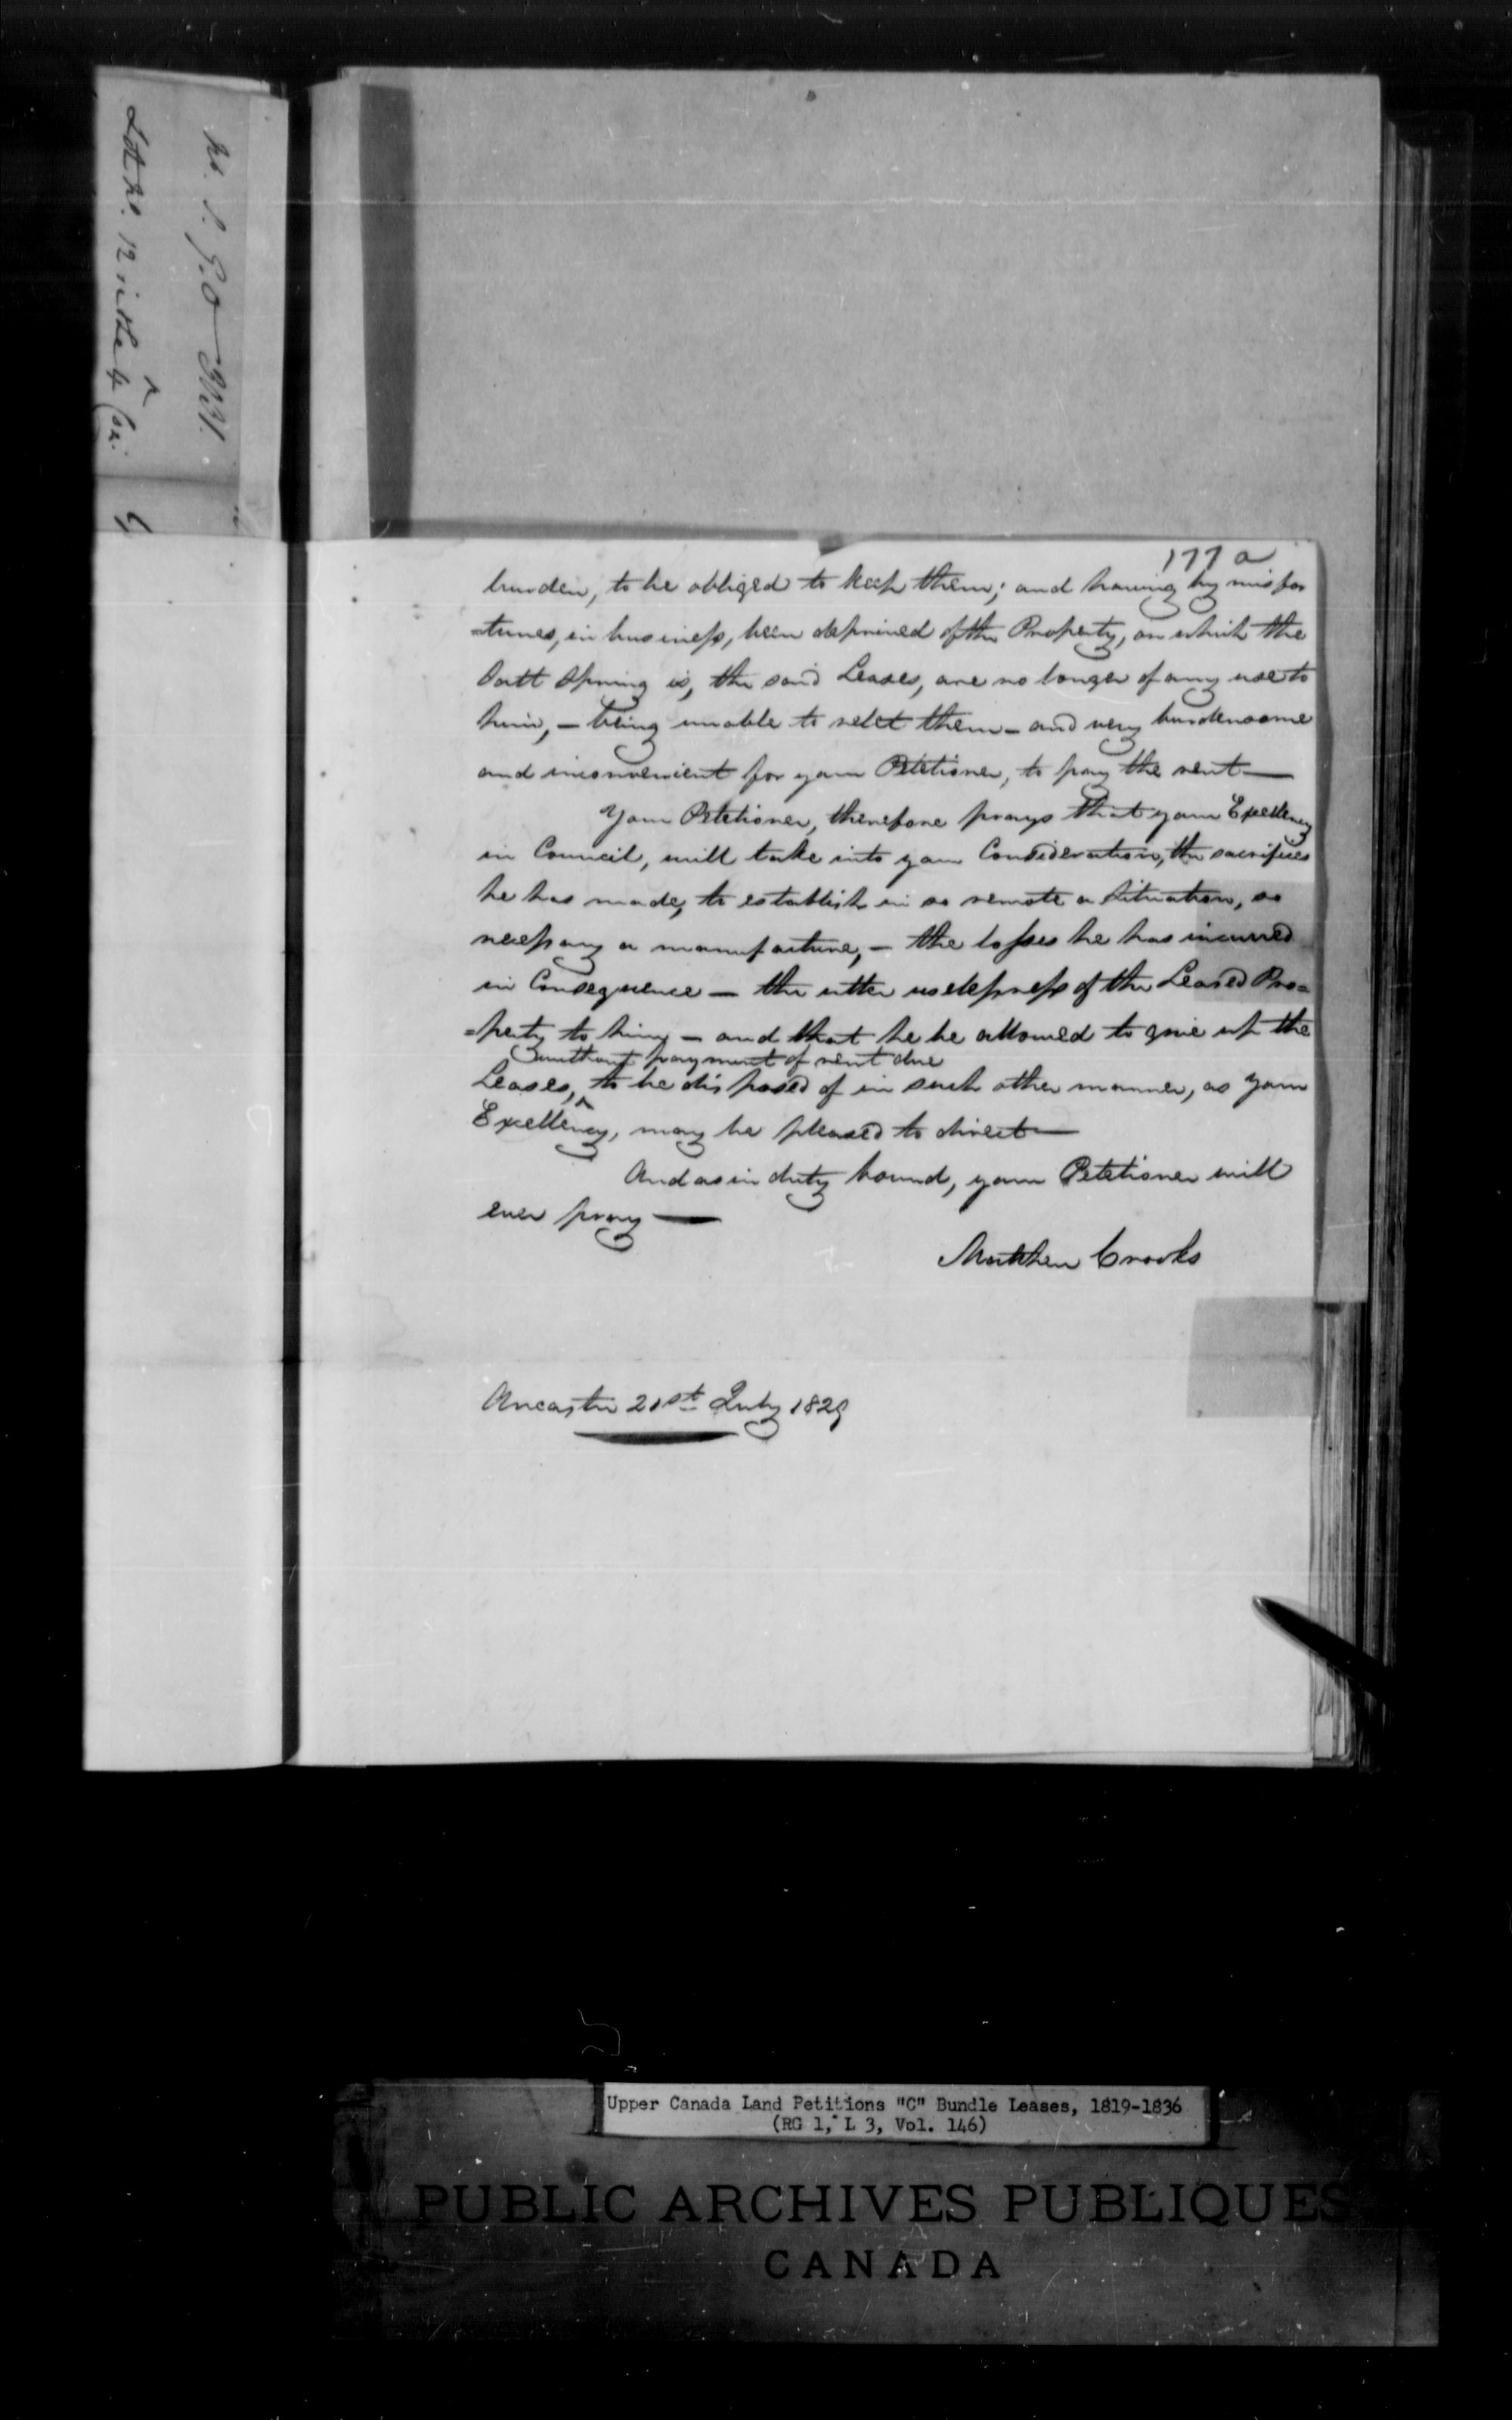 Title: Upper Canada Land Petitions (1763-1865) - Mikan Number: 205131 - Microform: c-1740